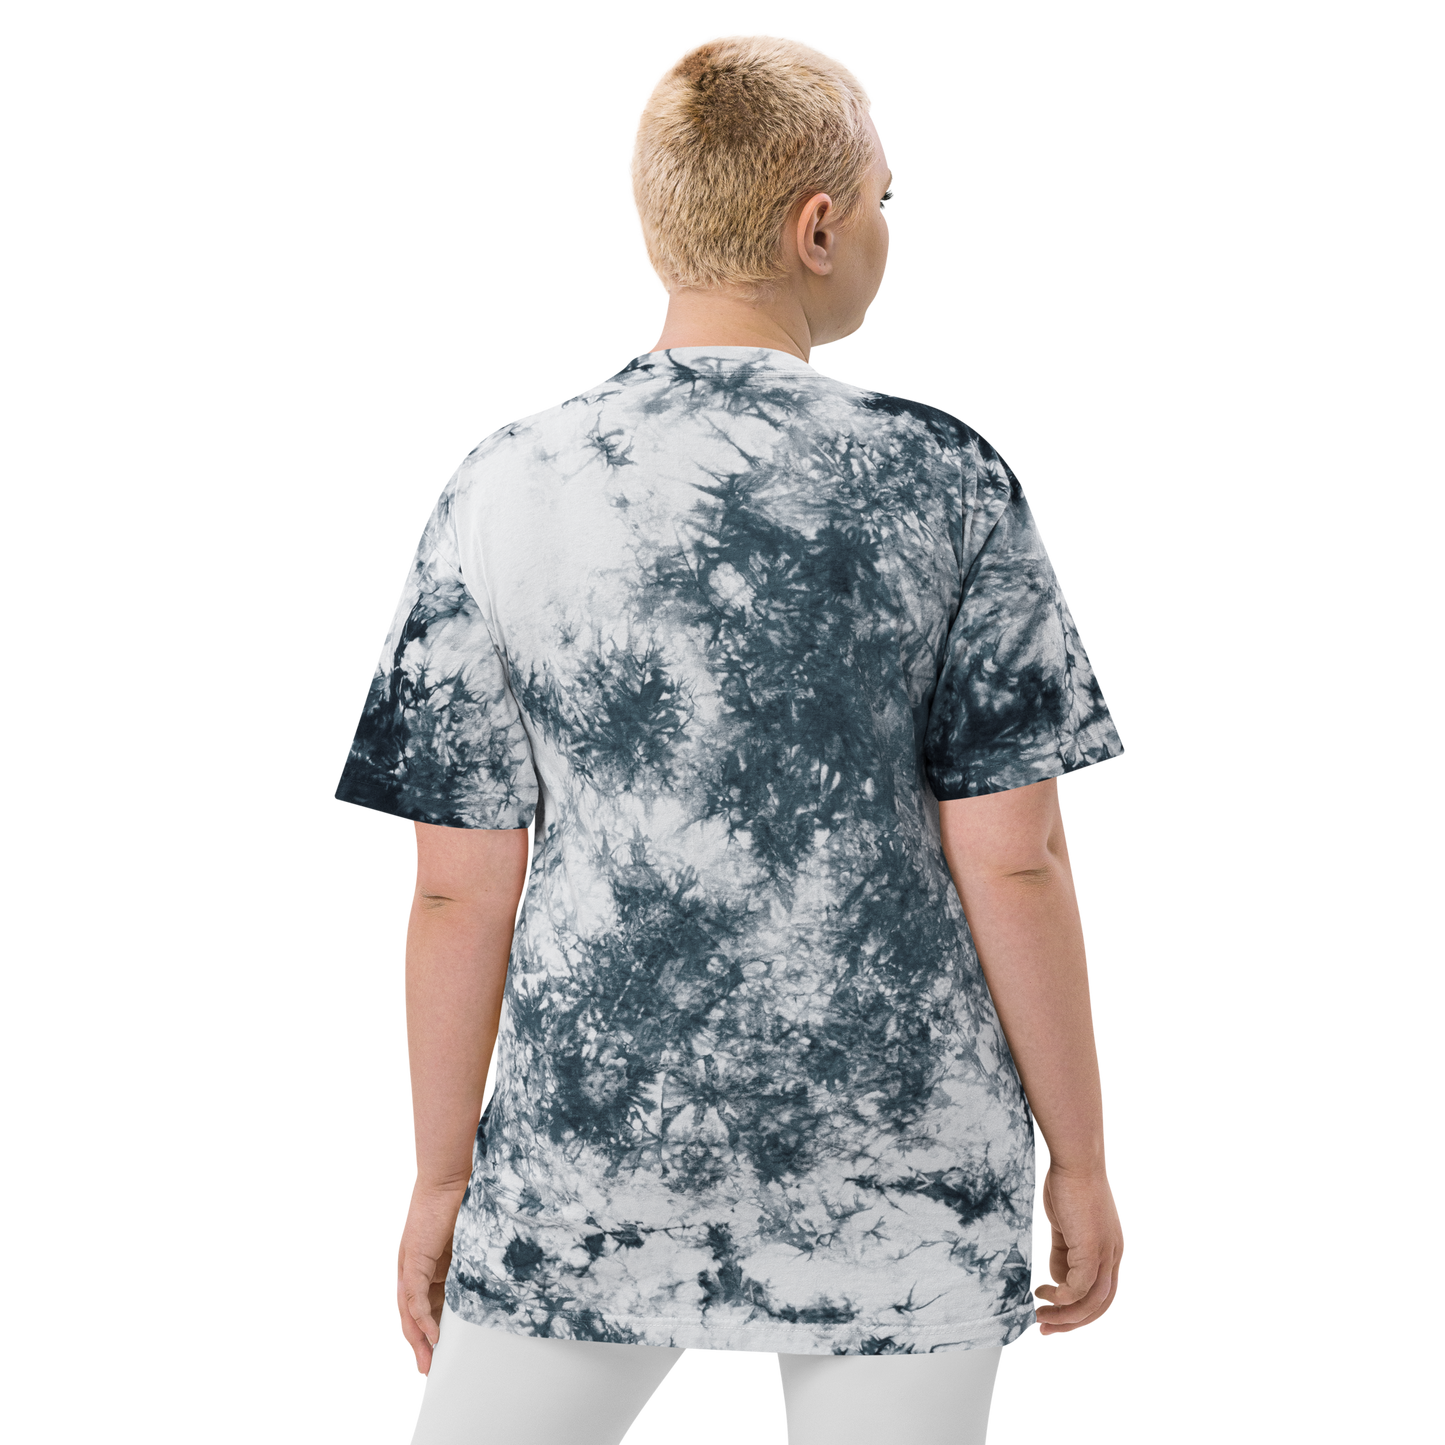 YHM Designs - YQG Windsor Oversized Tie-Dye T-Shirt - Crossed-X Design with Airport Code and Vintage Propliner - White Embroidery - Image 17